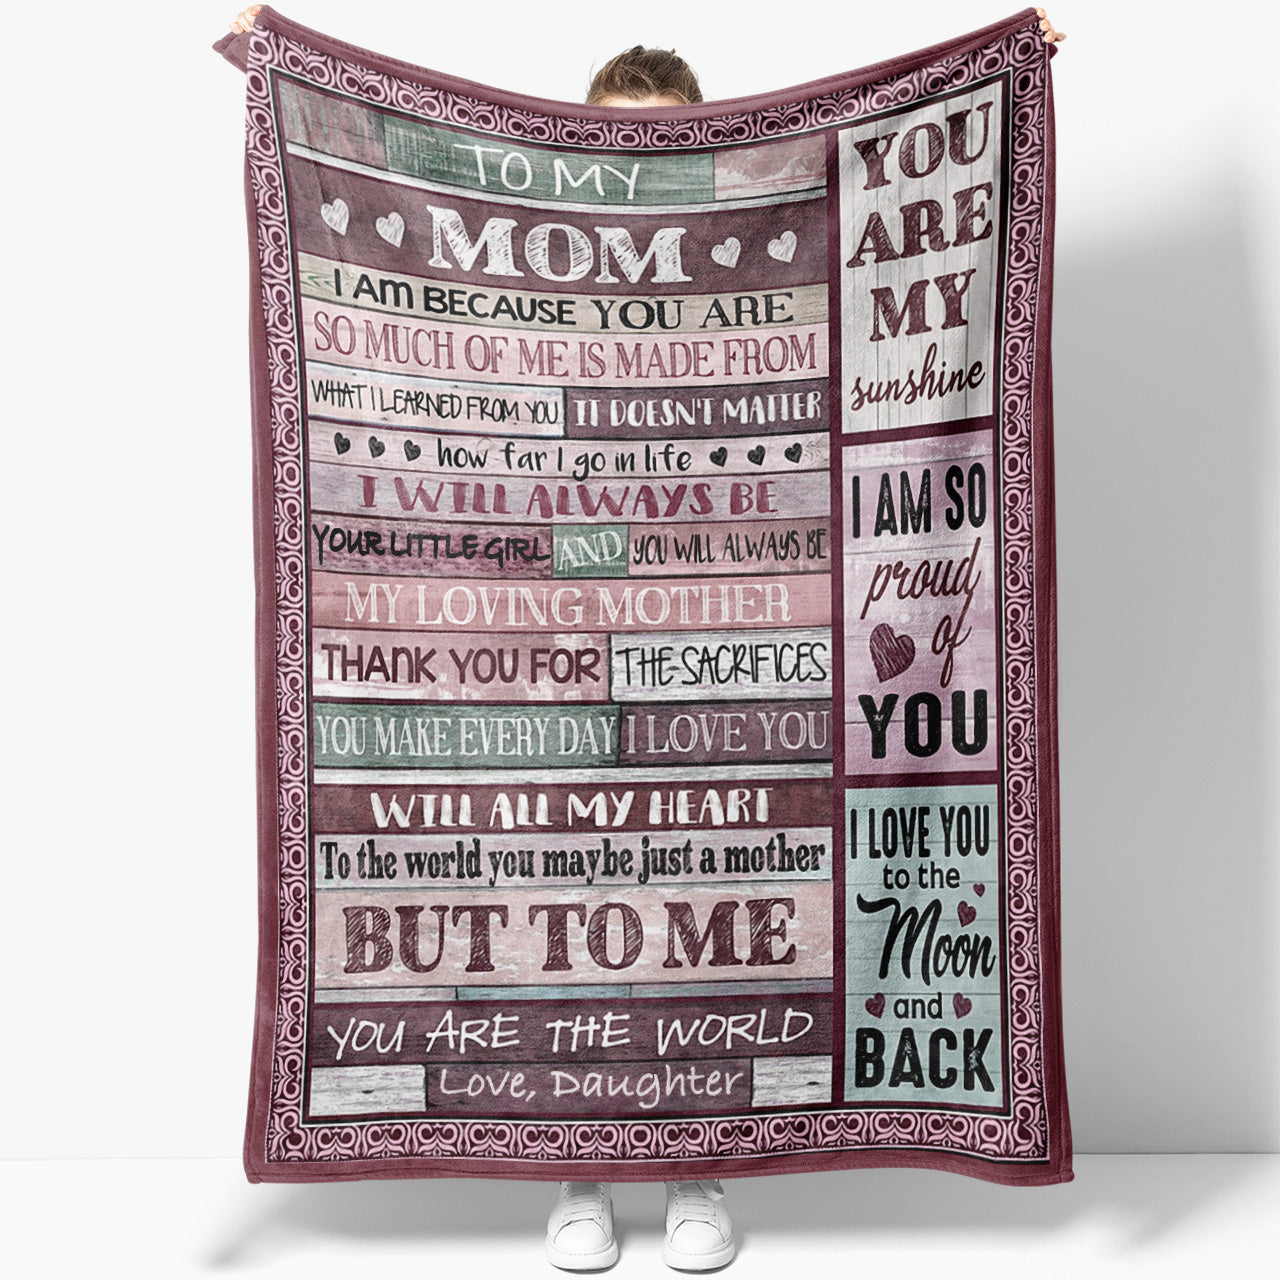 Blanket Gift Ideas For Mom, Funny Happy Cute Mothers Day Gifts Ideas, I Am,  Thoughtful Mother Birthday Gift Ideas, Things To Get Mom For Christmas -  Sweet Family Gift